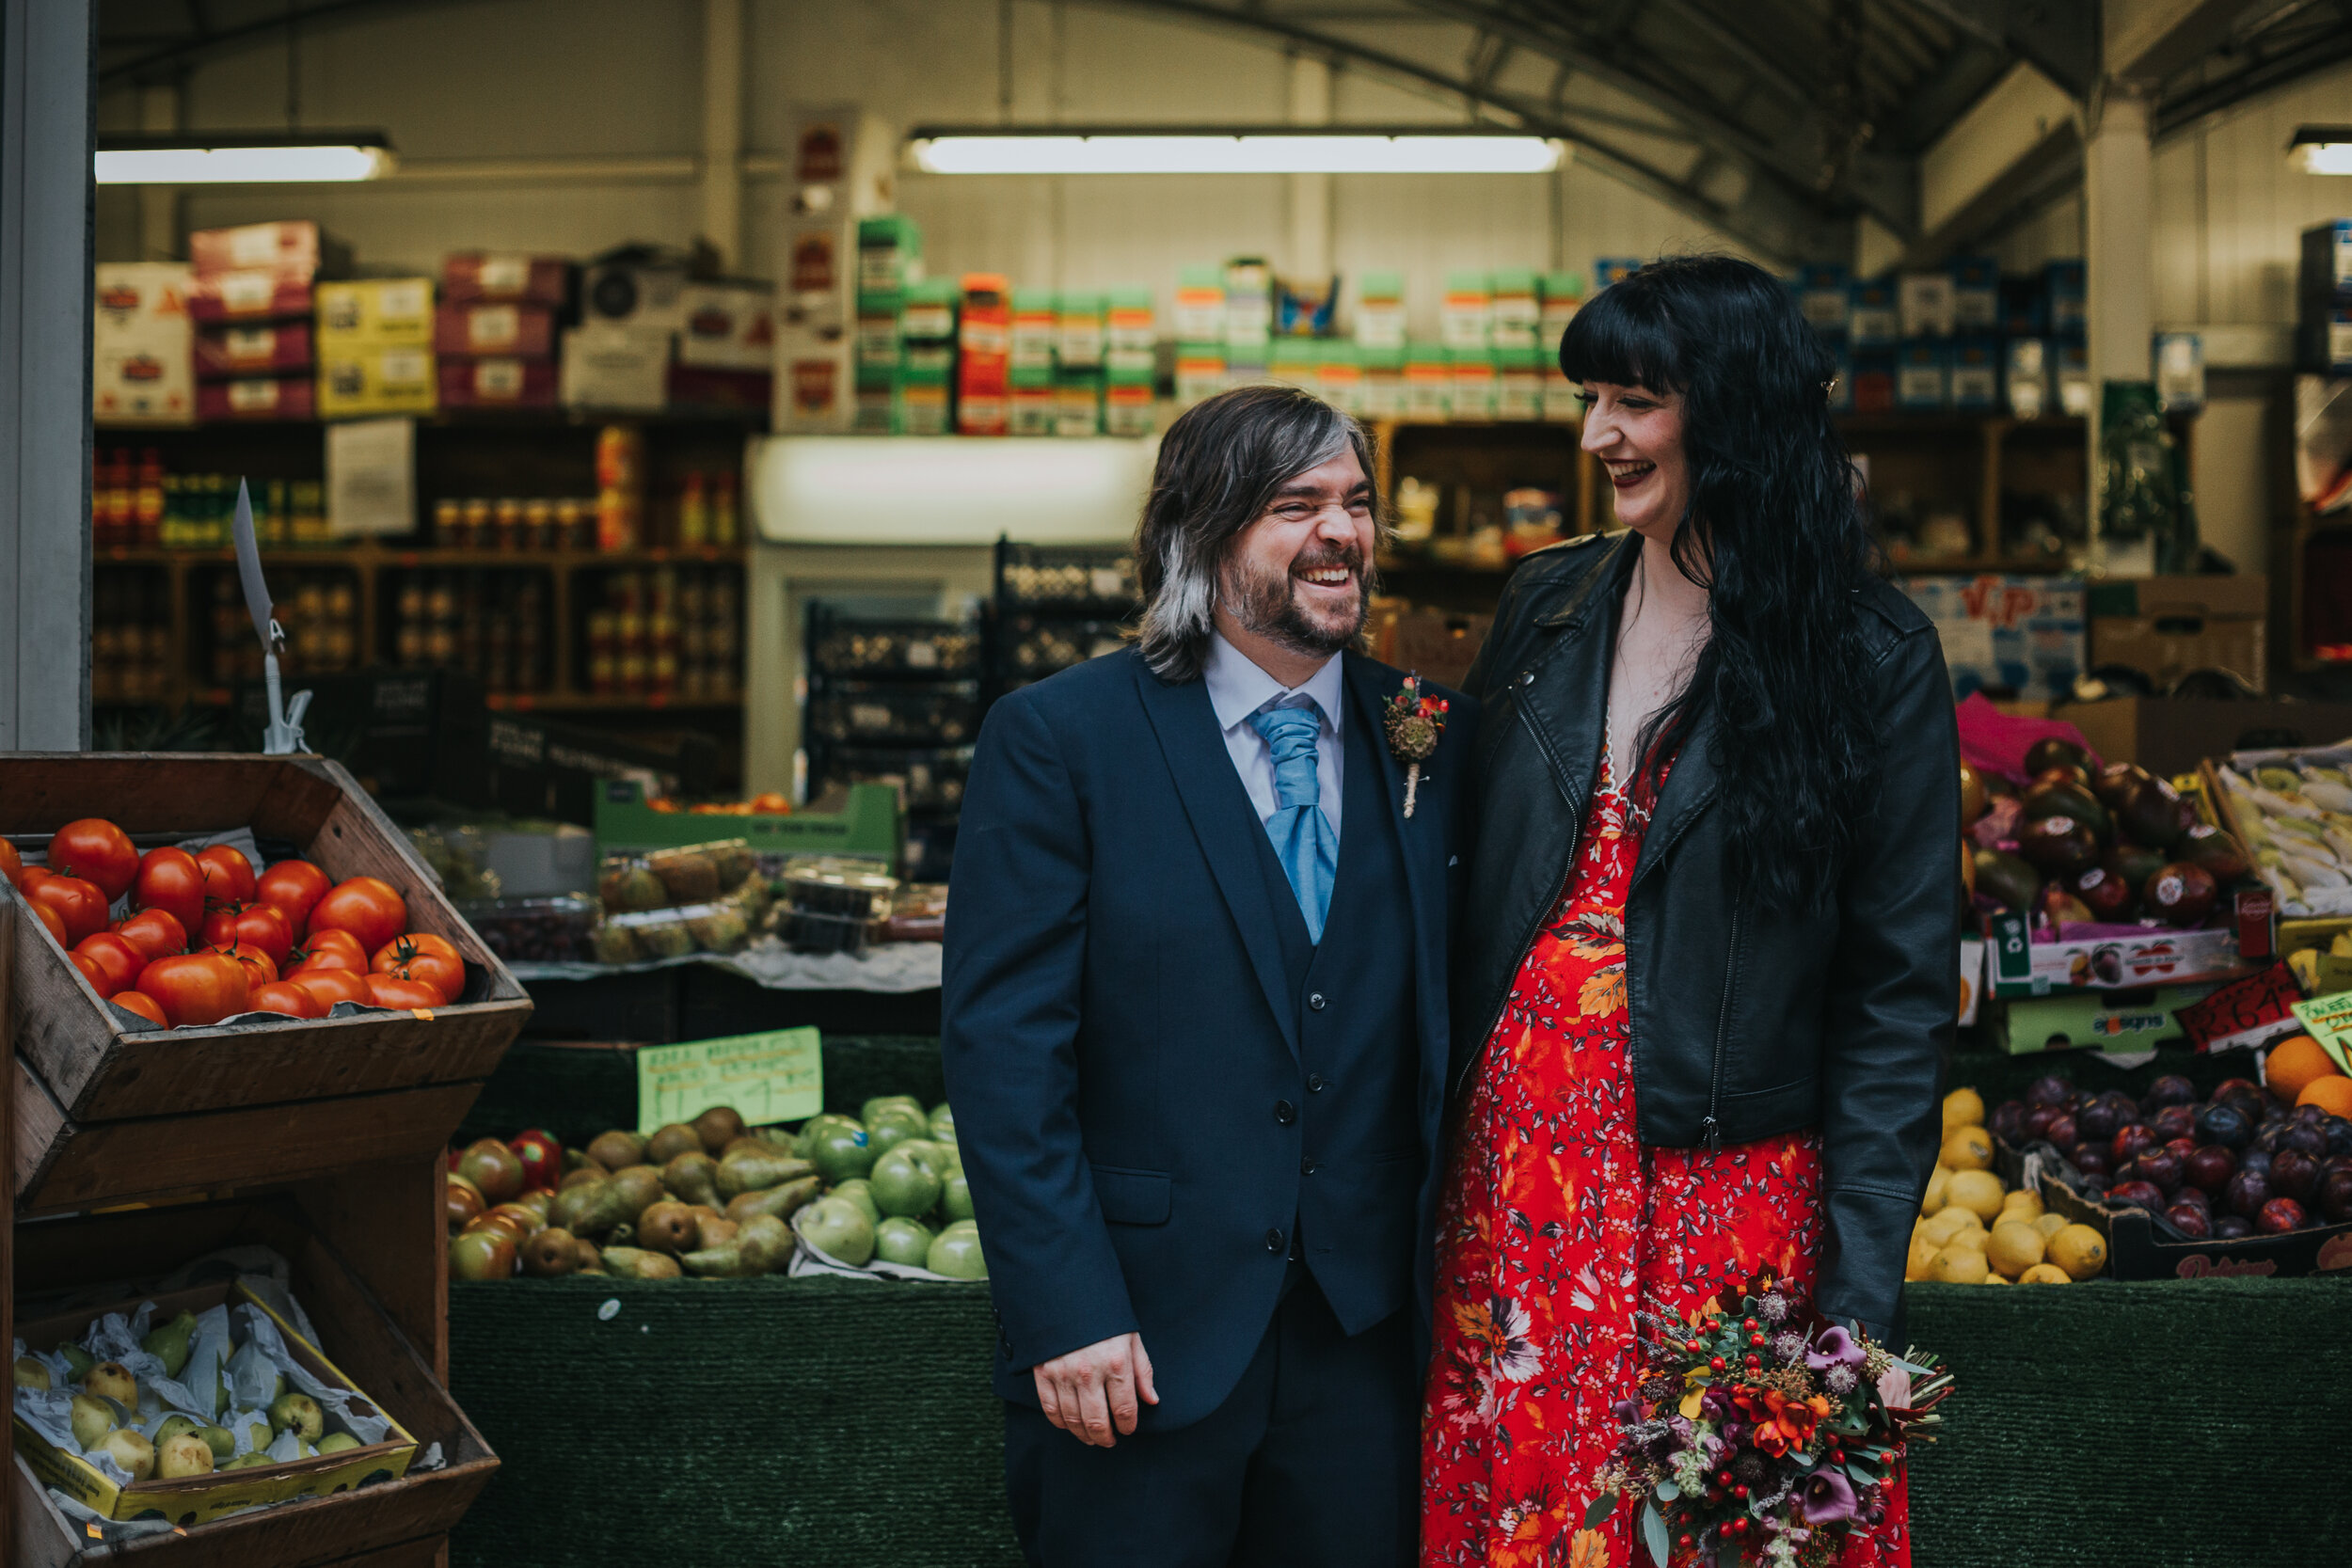 Mid shot of the Bride and Groom laughing outside a vegetable stall in Manchester City Centre. (Copy)